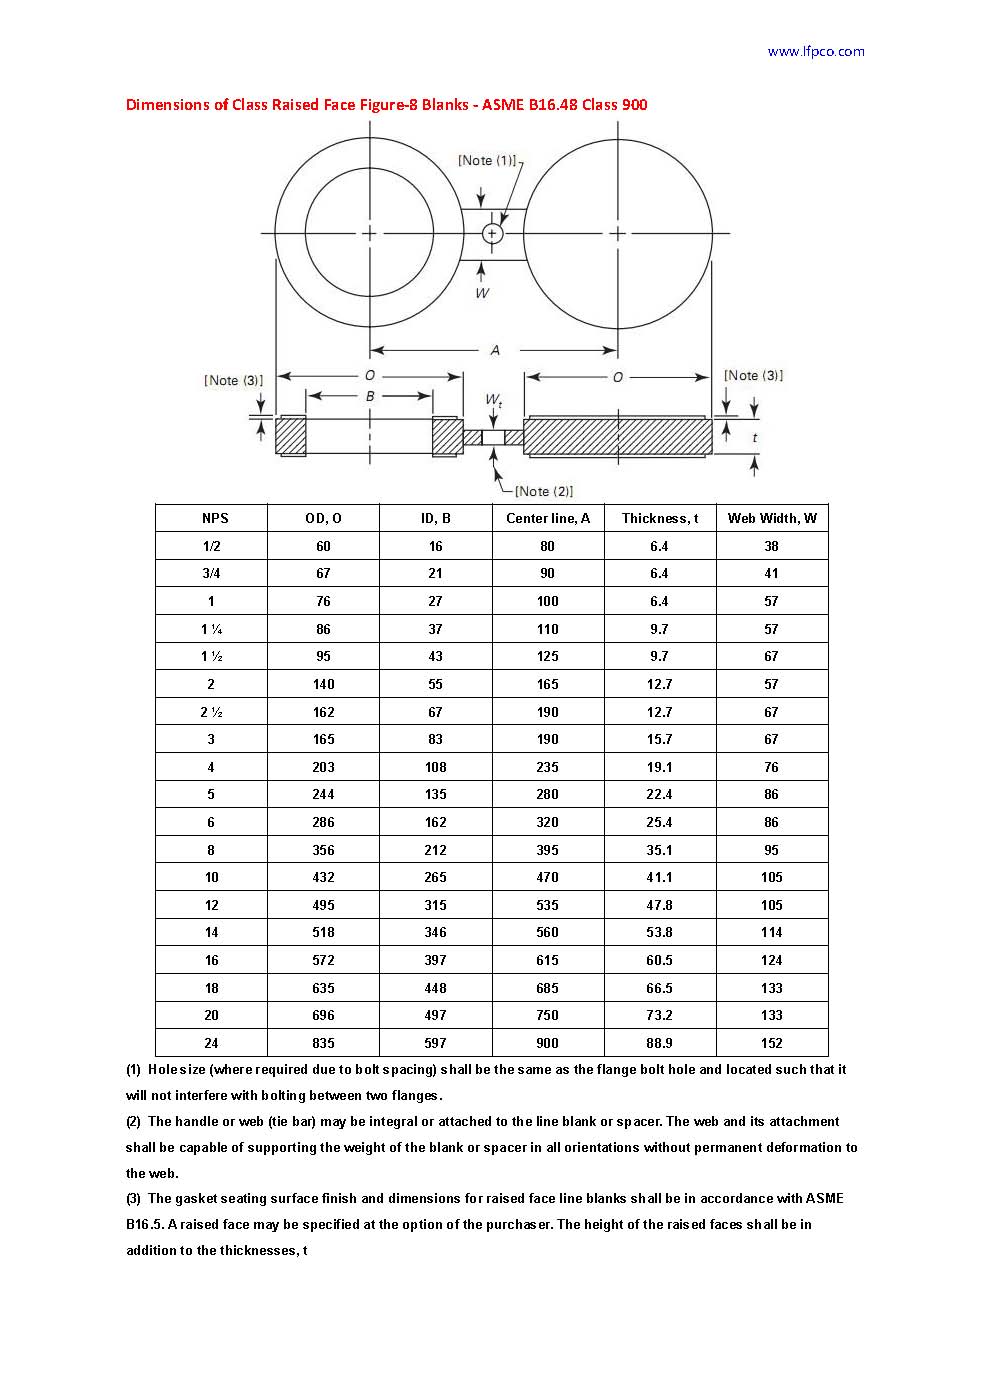 Dimensions of raised face figure 8 blanks ASME B16.48_class900